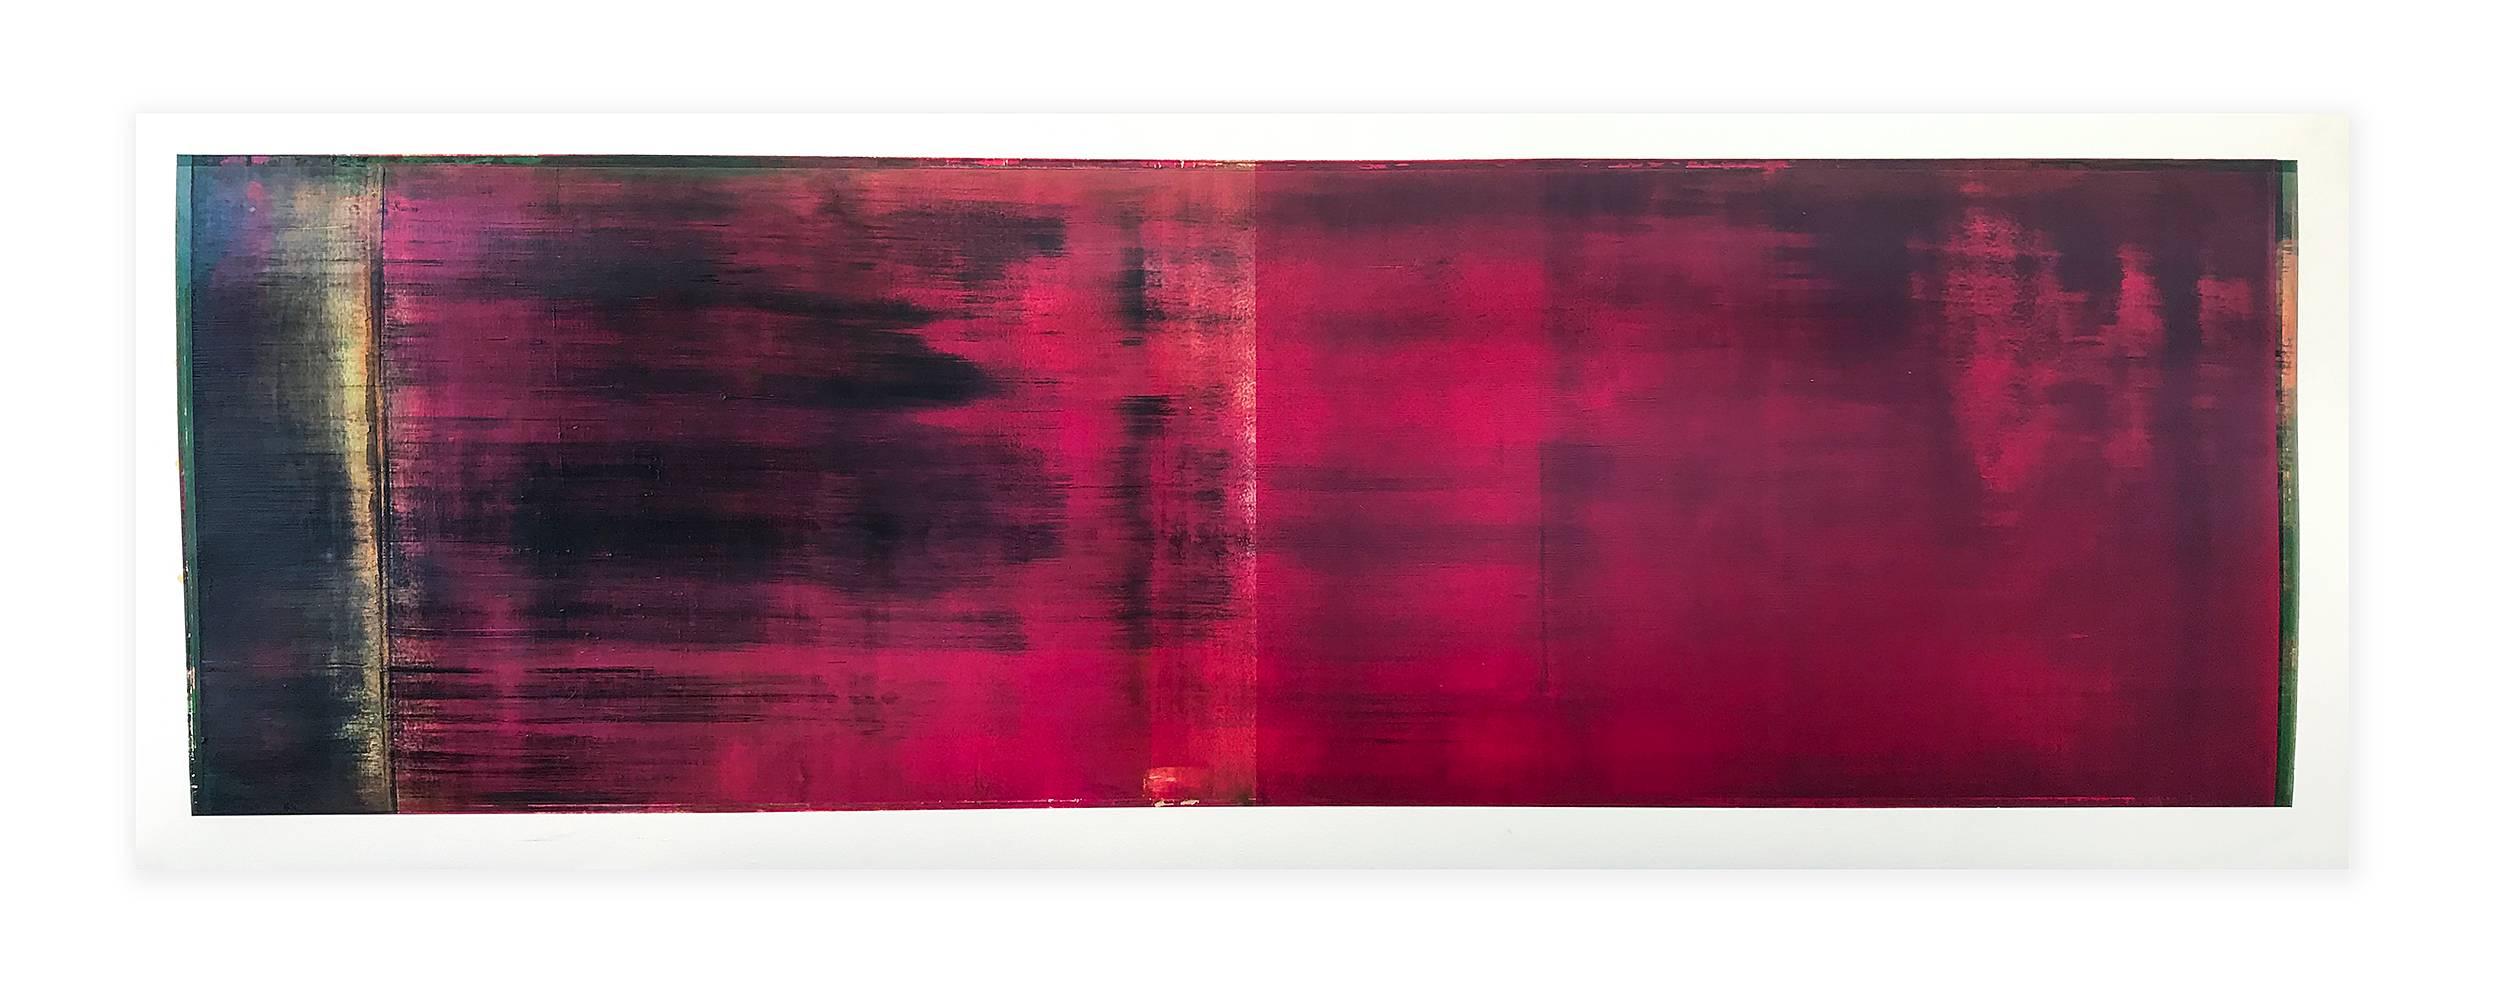 Daniel Brice, Untitled (OX 47), 2017, oil on paper, 18 x 51 inches, abstract, color field painting on Arches archival paper specifically made for oil paint. This piece is predominantly magenta with hints of green yellow and black. 

Saturated color